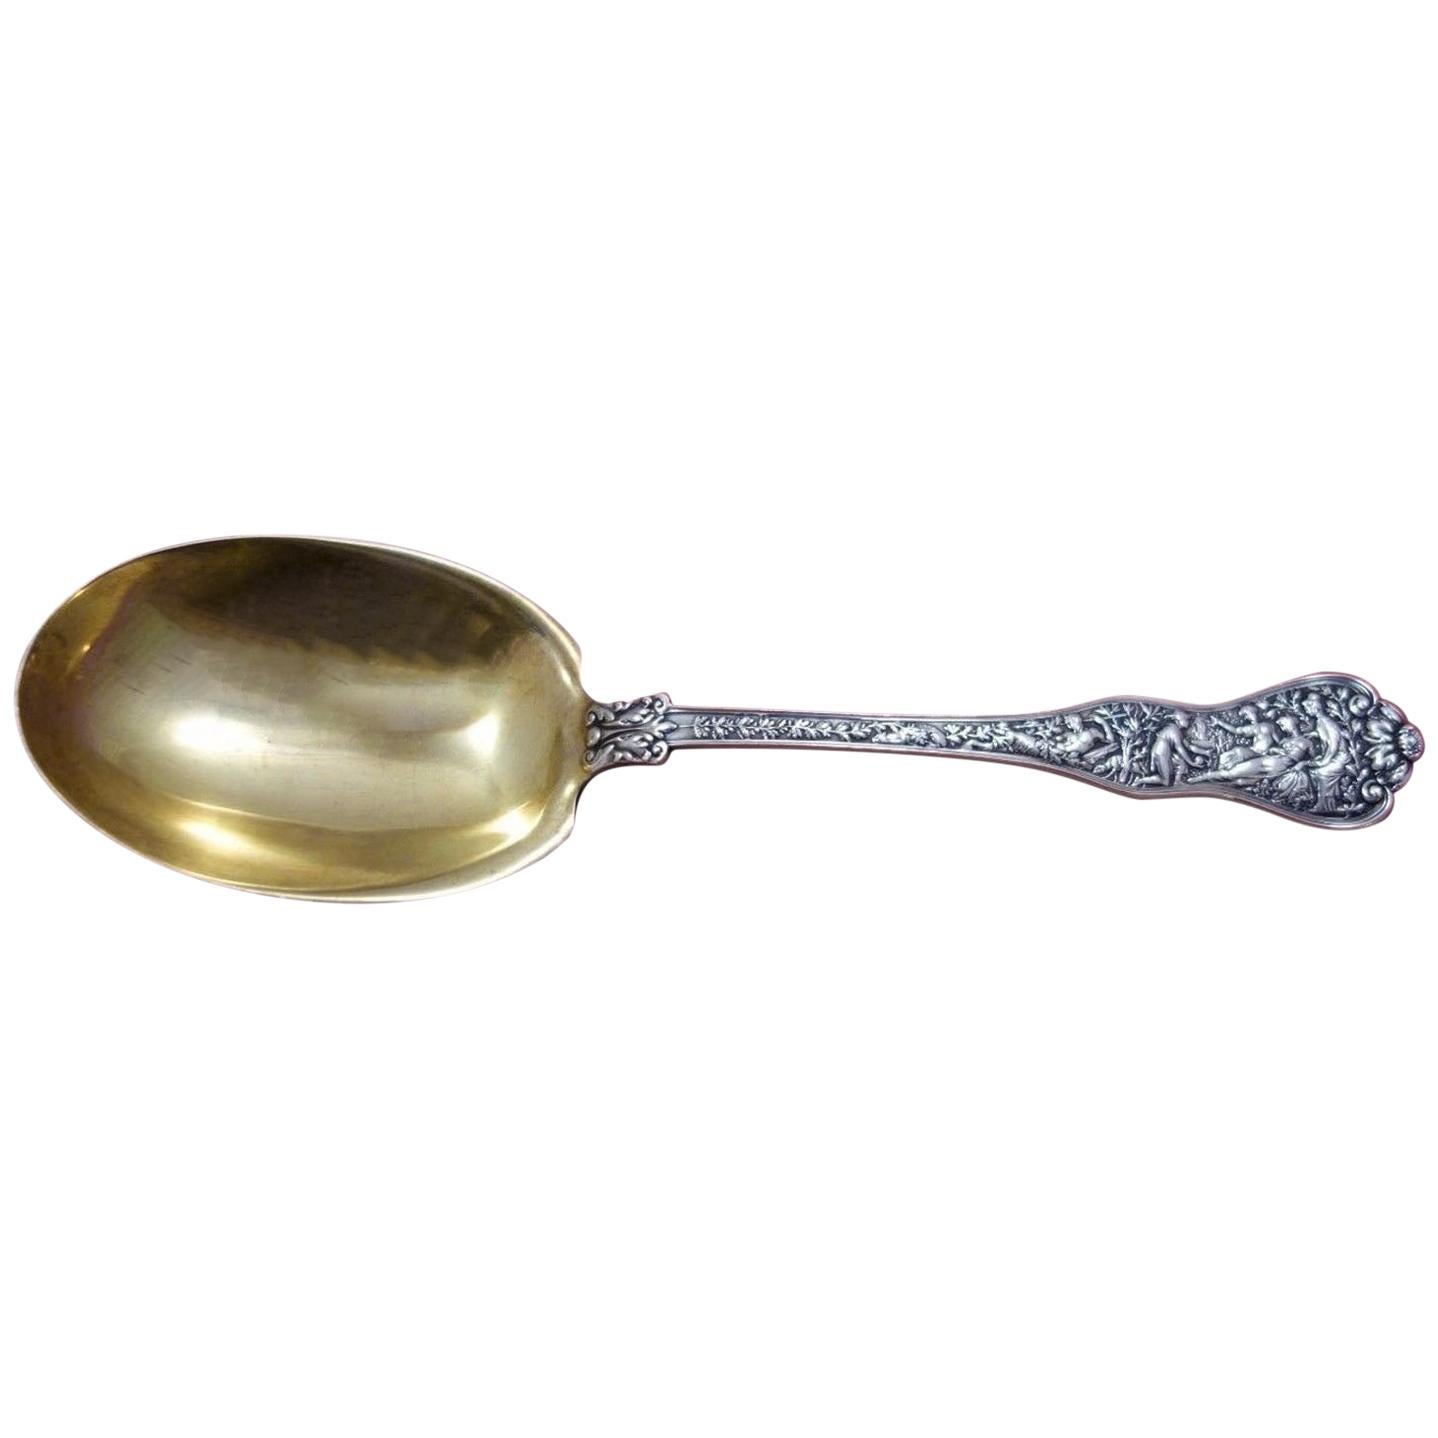 Olympian by Tiffany & Co. Sterling Silver Berry Spoon Gold Washed Plain